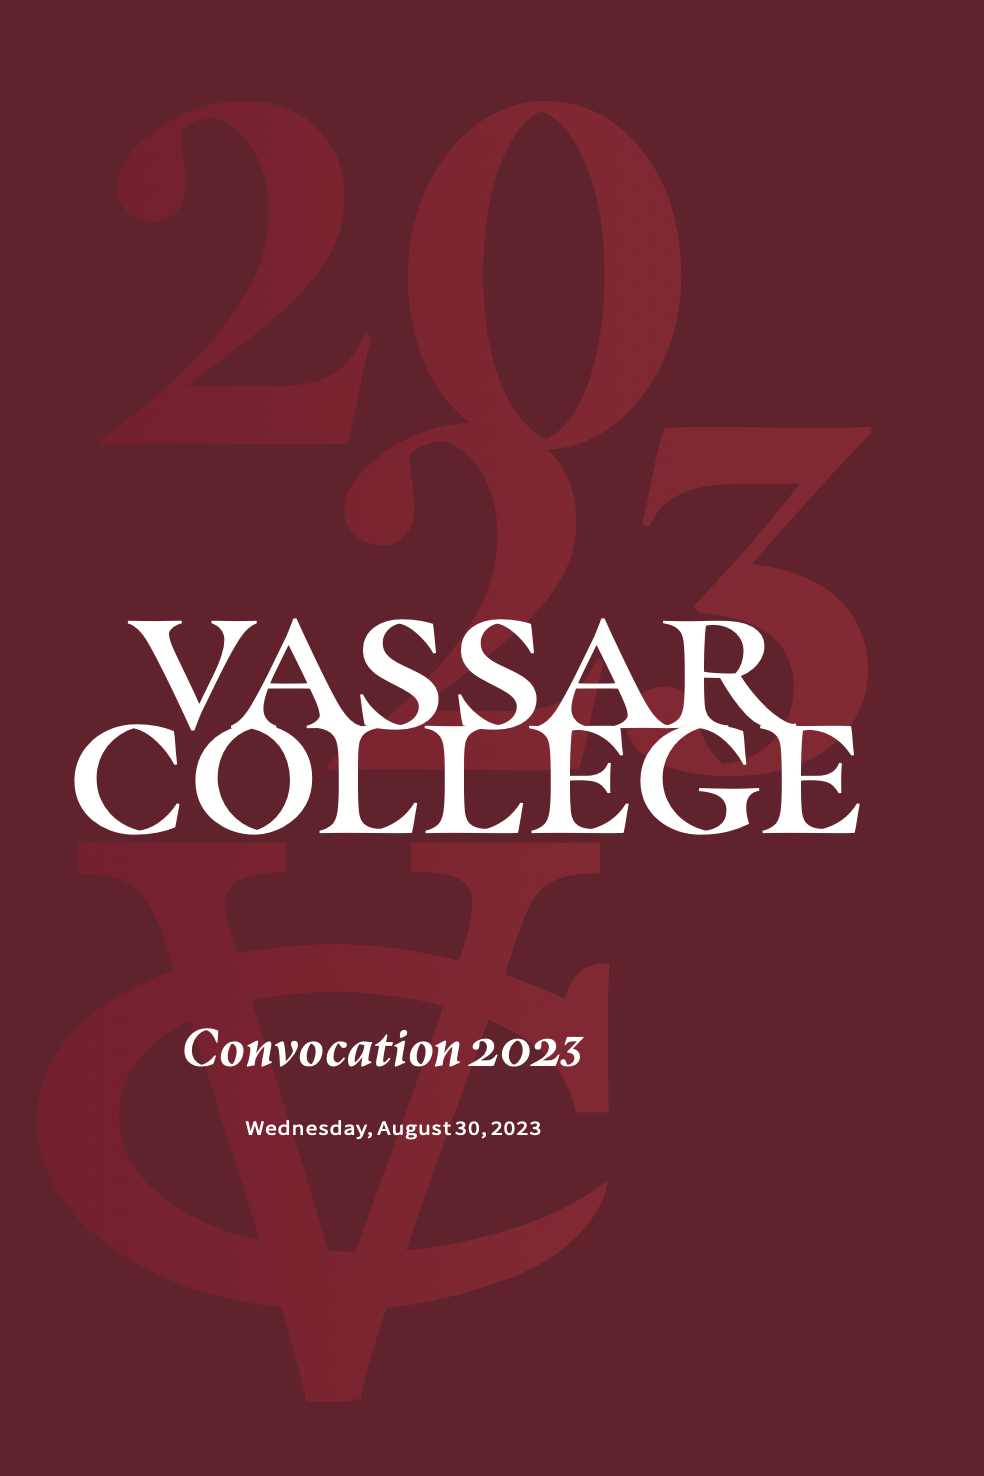 The cover for the 2023 Convocation program. It is burgundy; a predominantly typographic layout. It has the text “Vassar College Convocation 2023, Wednesday, August 30, 2023”, placed on top of a design with “2023” and the VC monogram.